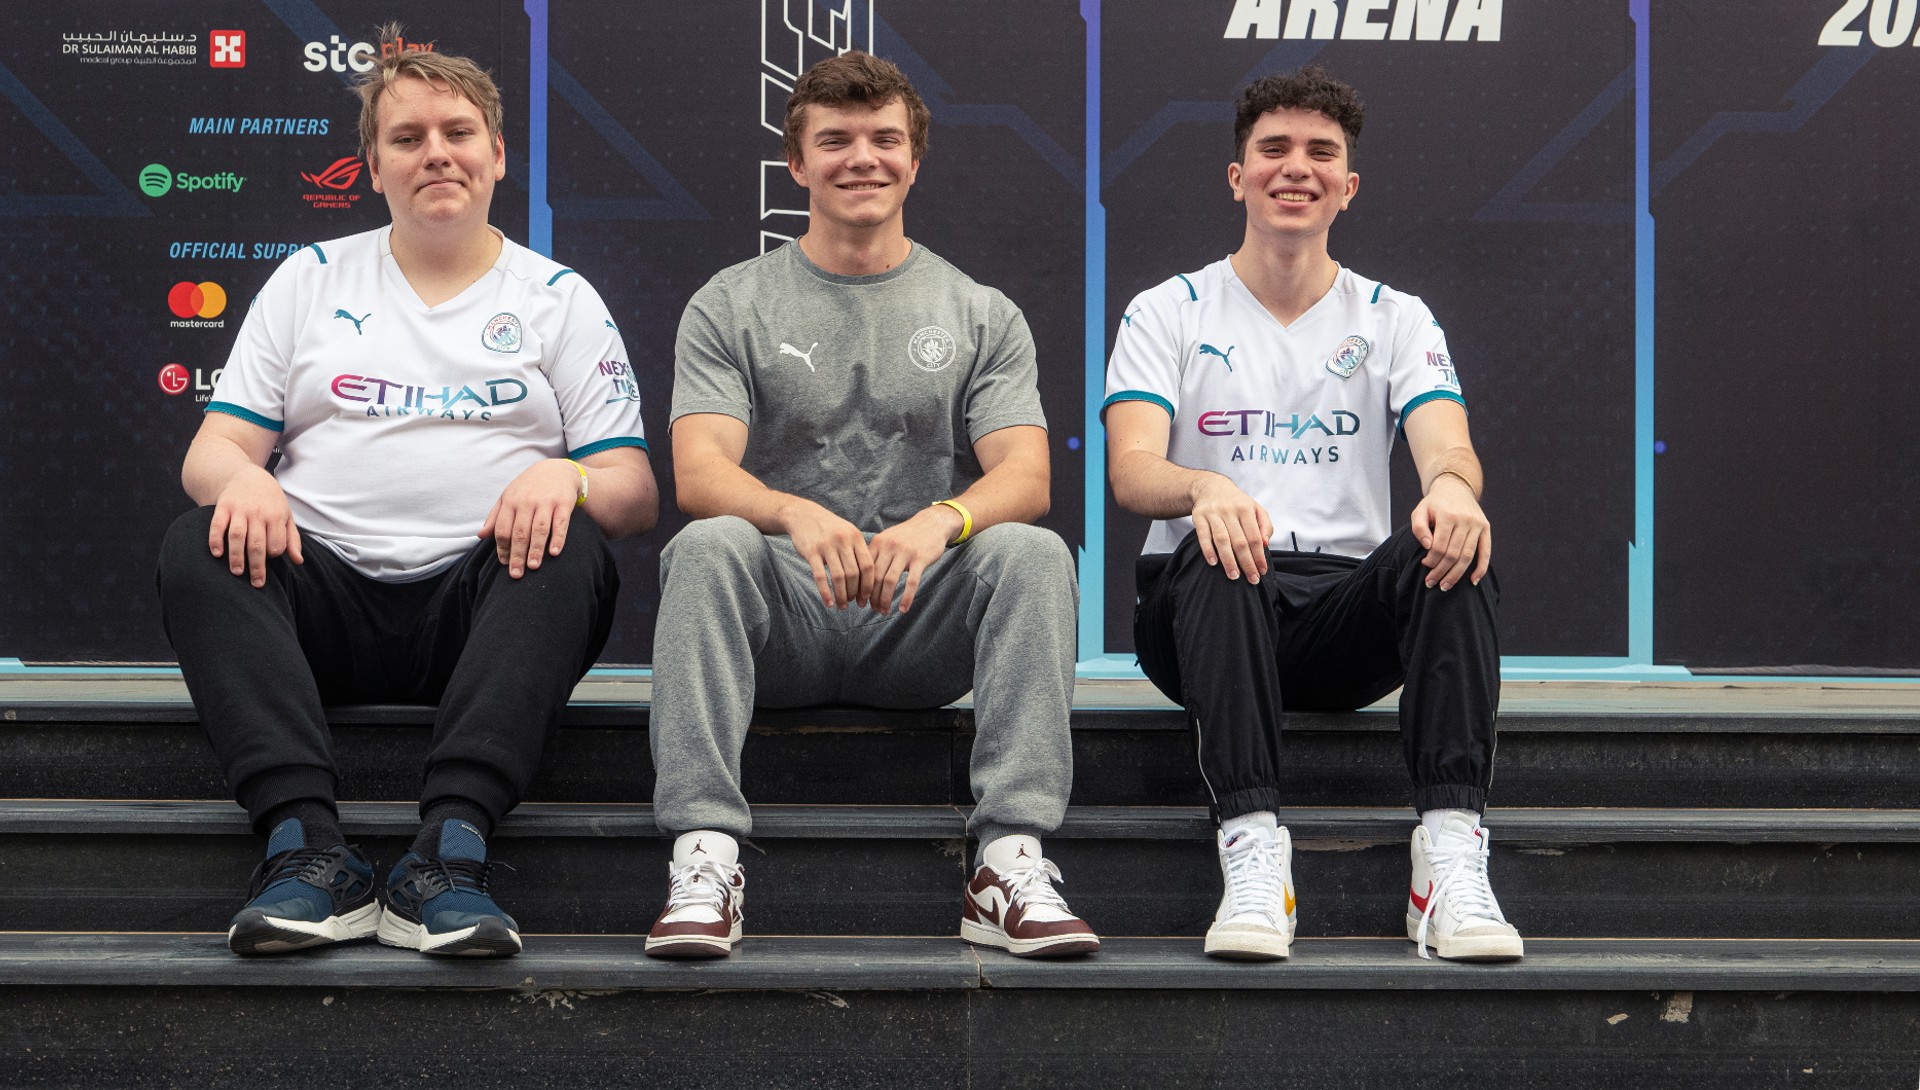 Strong performance from esports team at Gamers8 Fortnite event